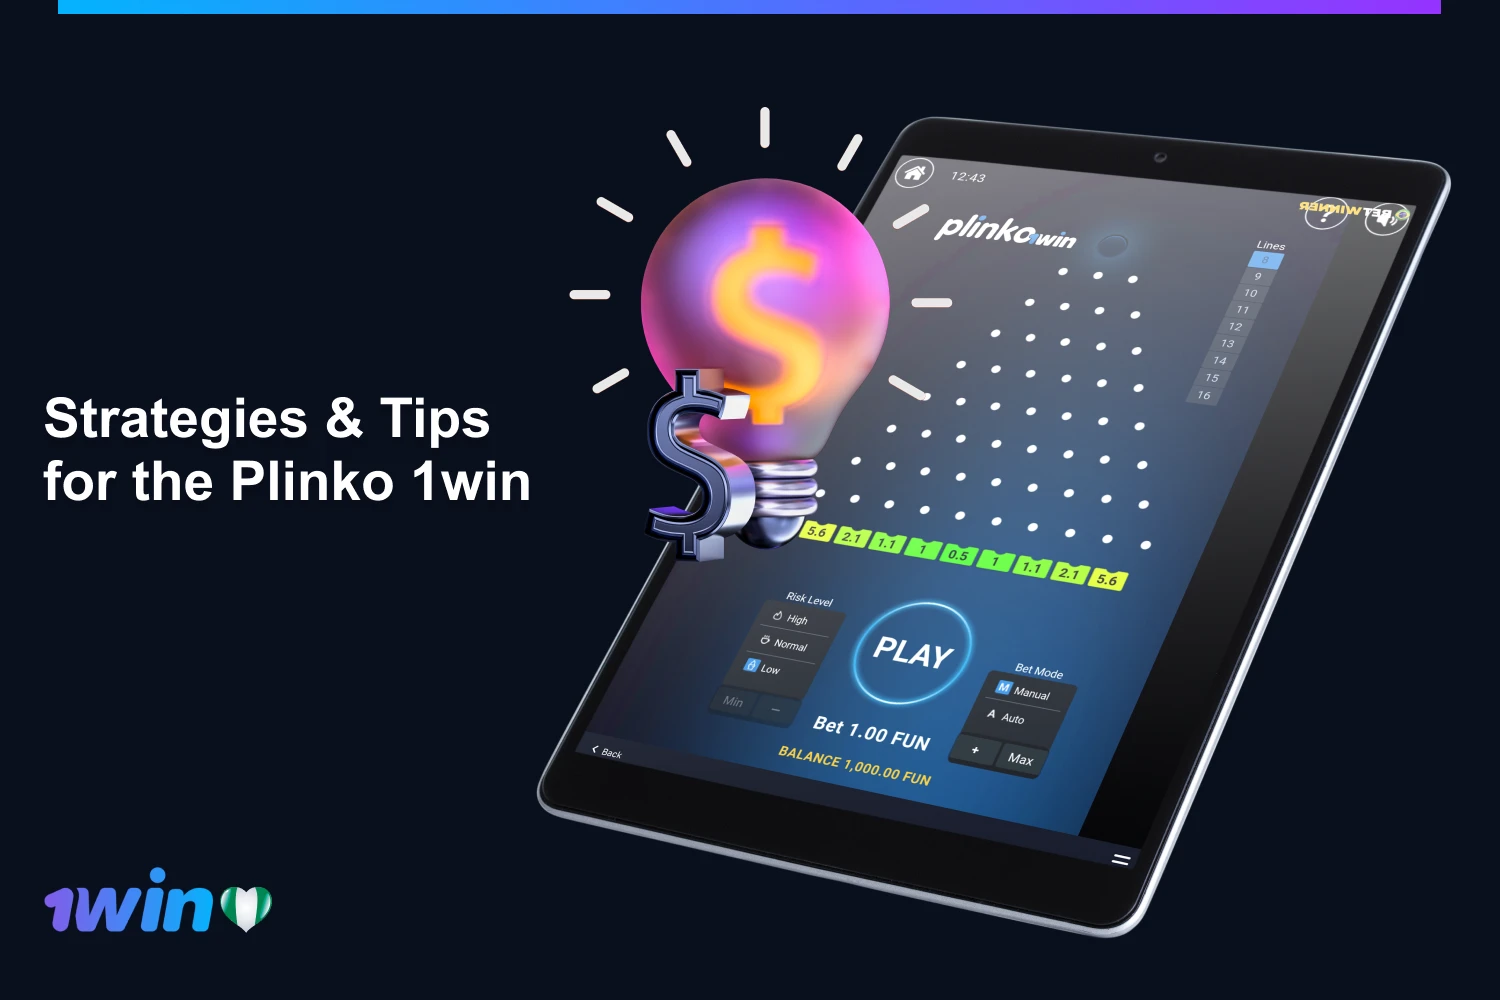 Experienced users from Nigeria have come up with various strategies and tips that increase the chances of winning at 1win Plinko